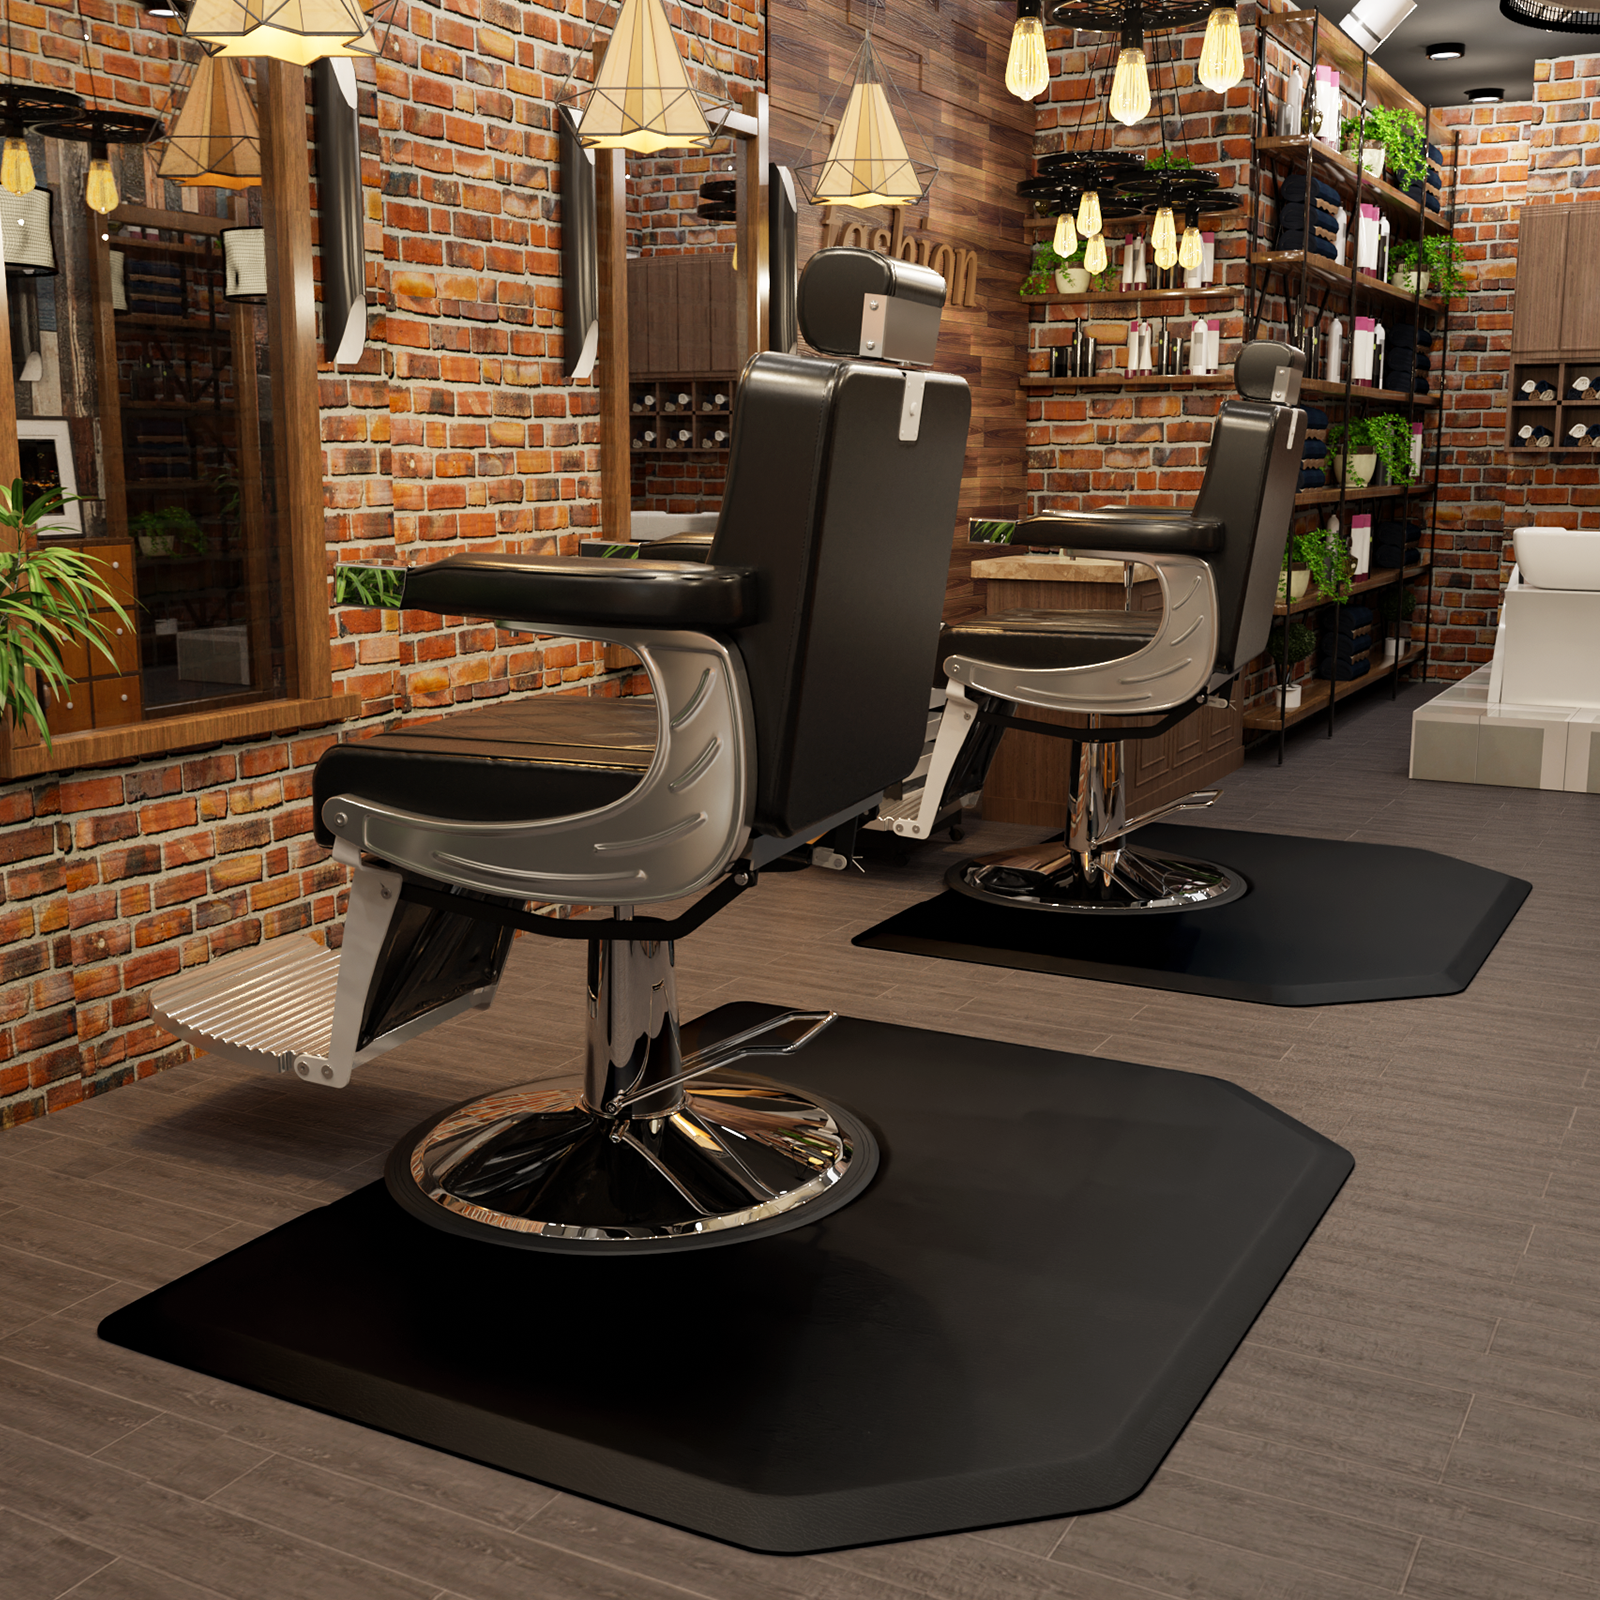 OmySalon 4' x 5' Salon Anti Fatigue Mat Hexagon Barber Mat for Round Base Styling Chair 1/2in 7/8in Thick